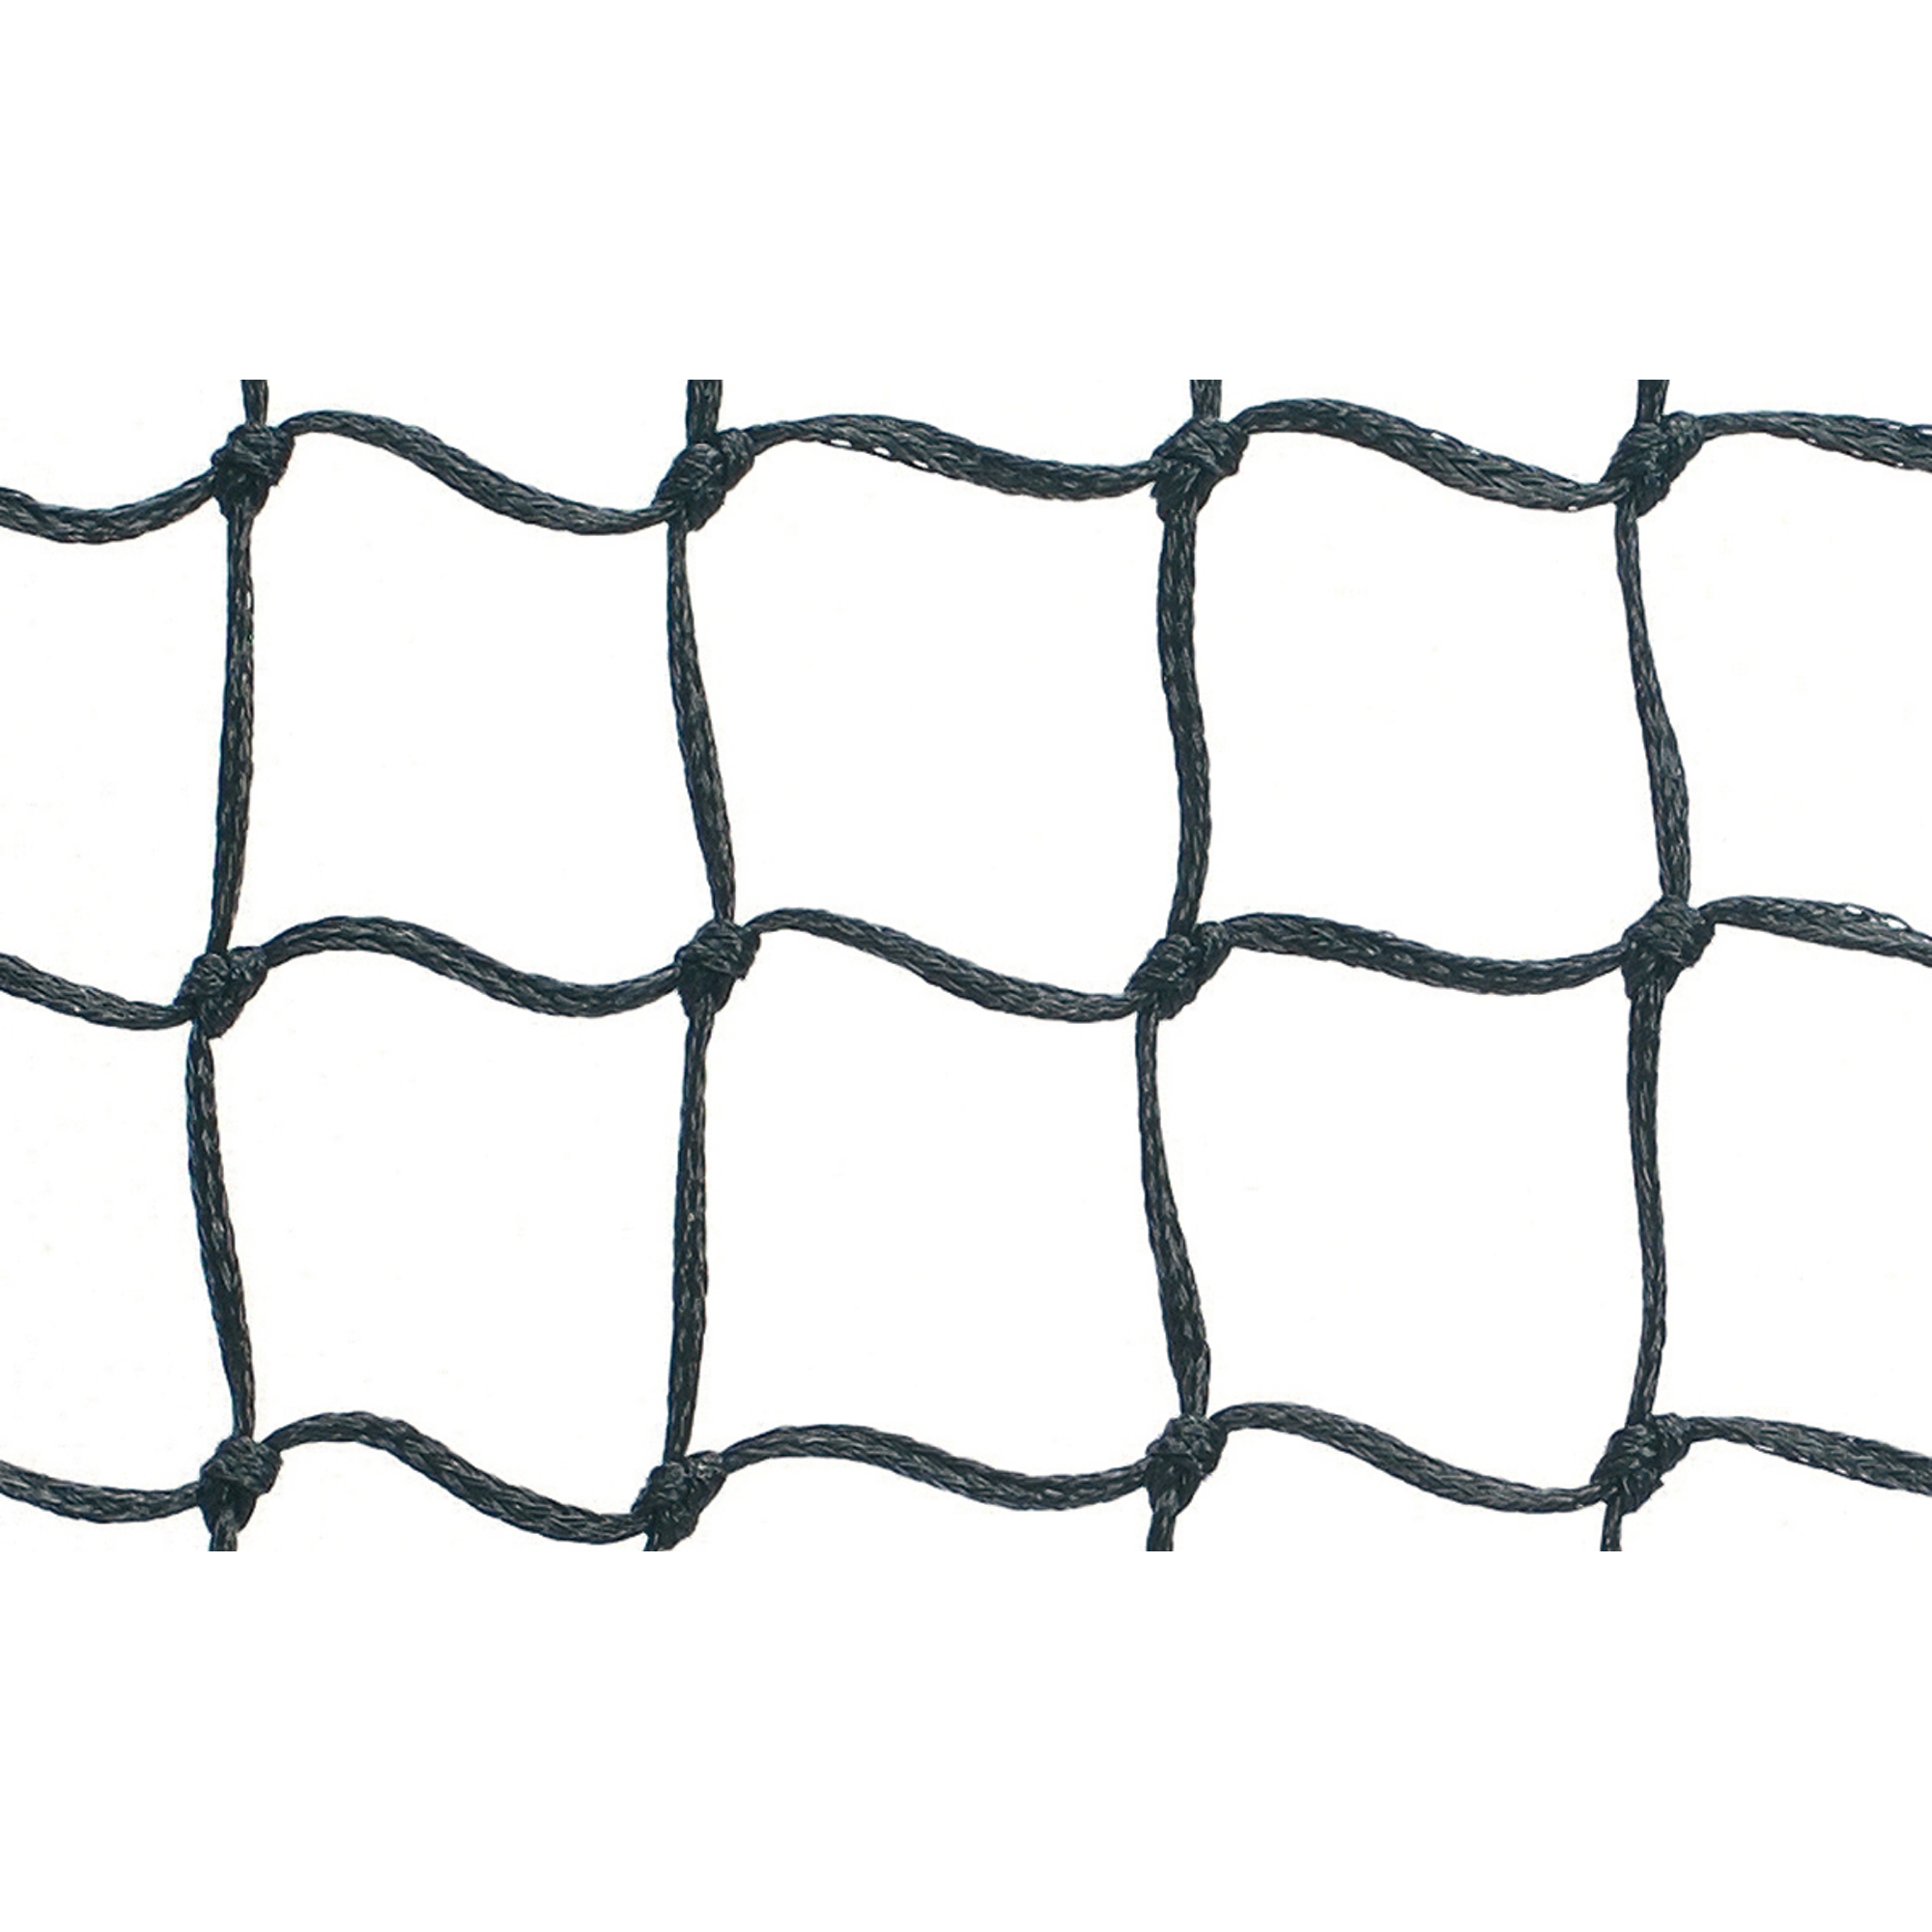 Net for Free Standing Hockey Goal Posts